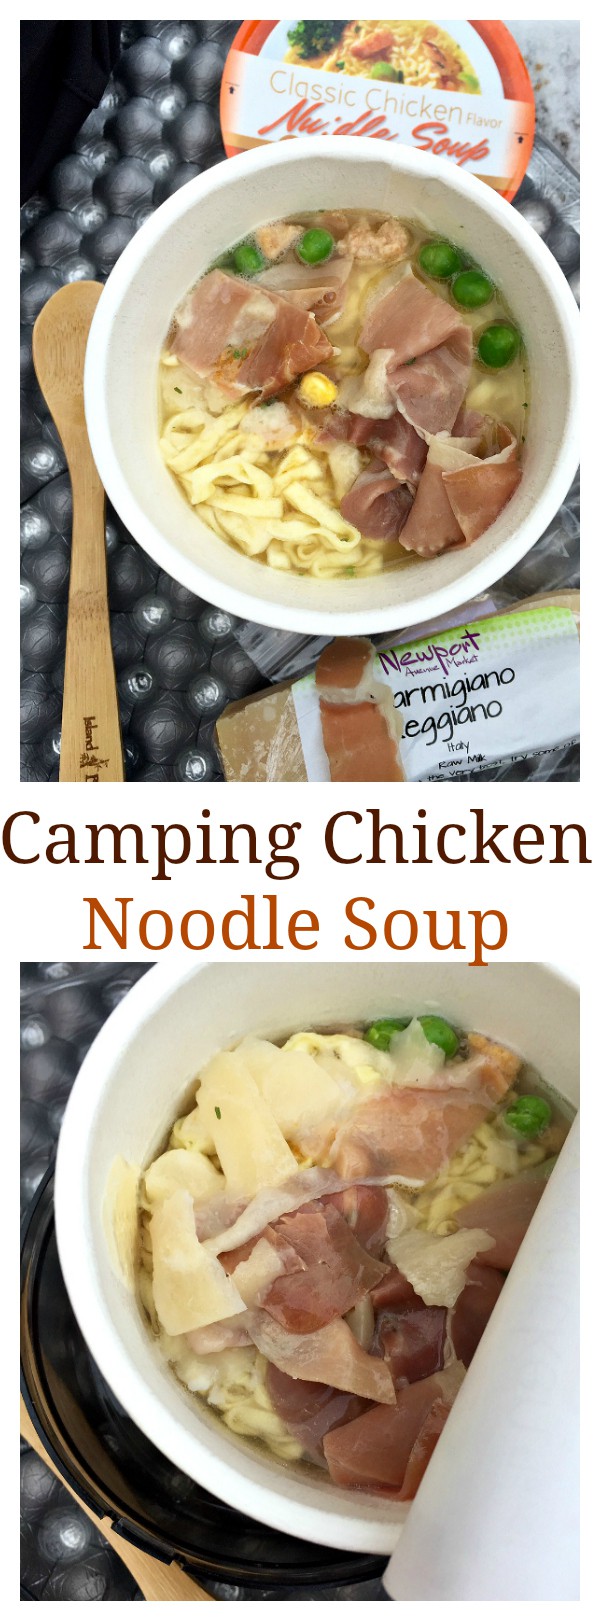 Camping Chicken Noodle Soup